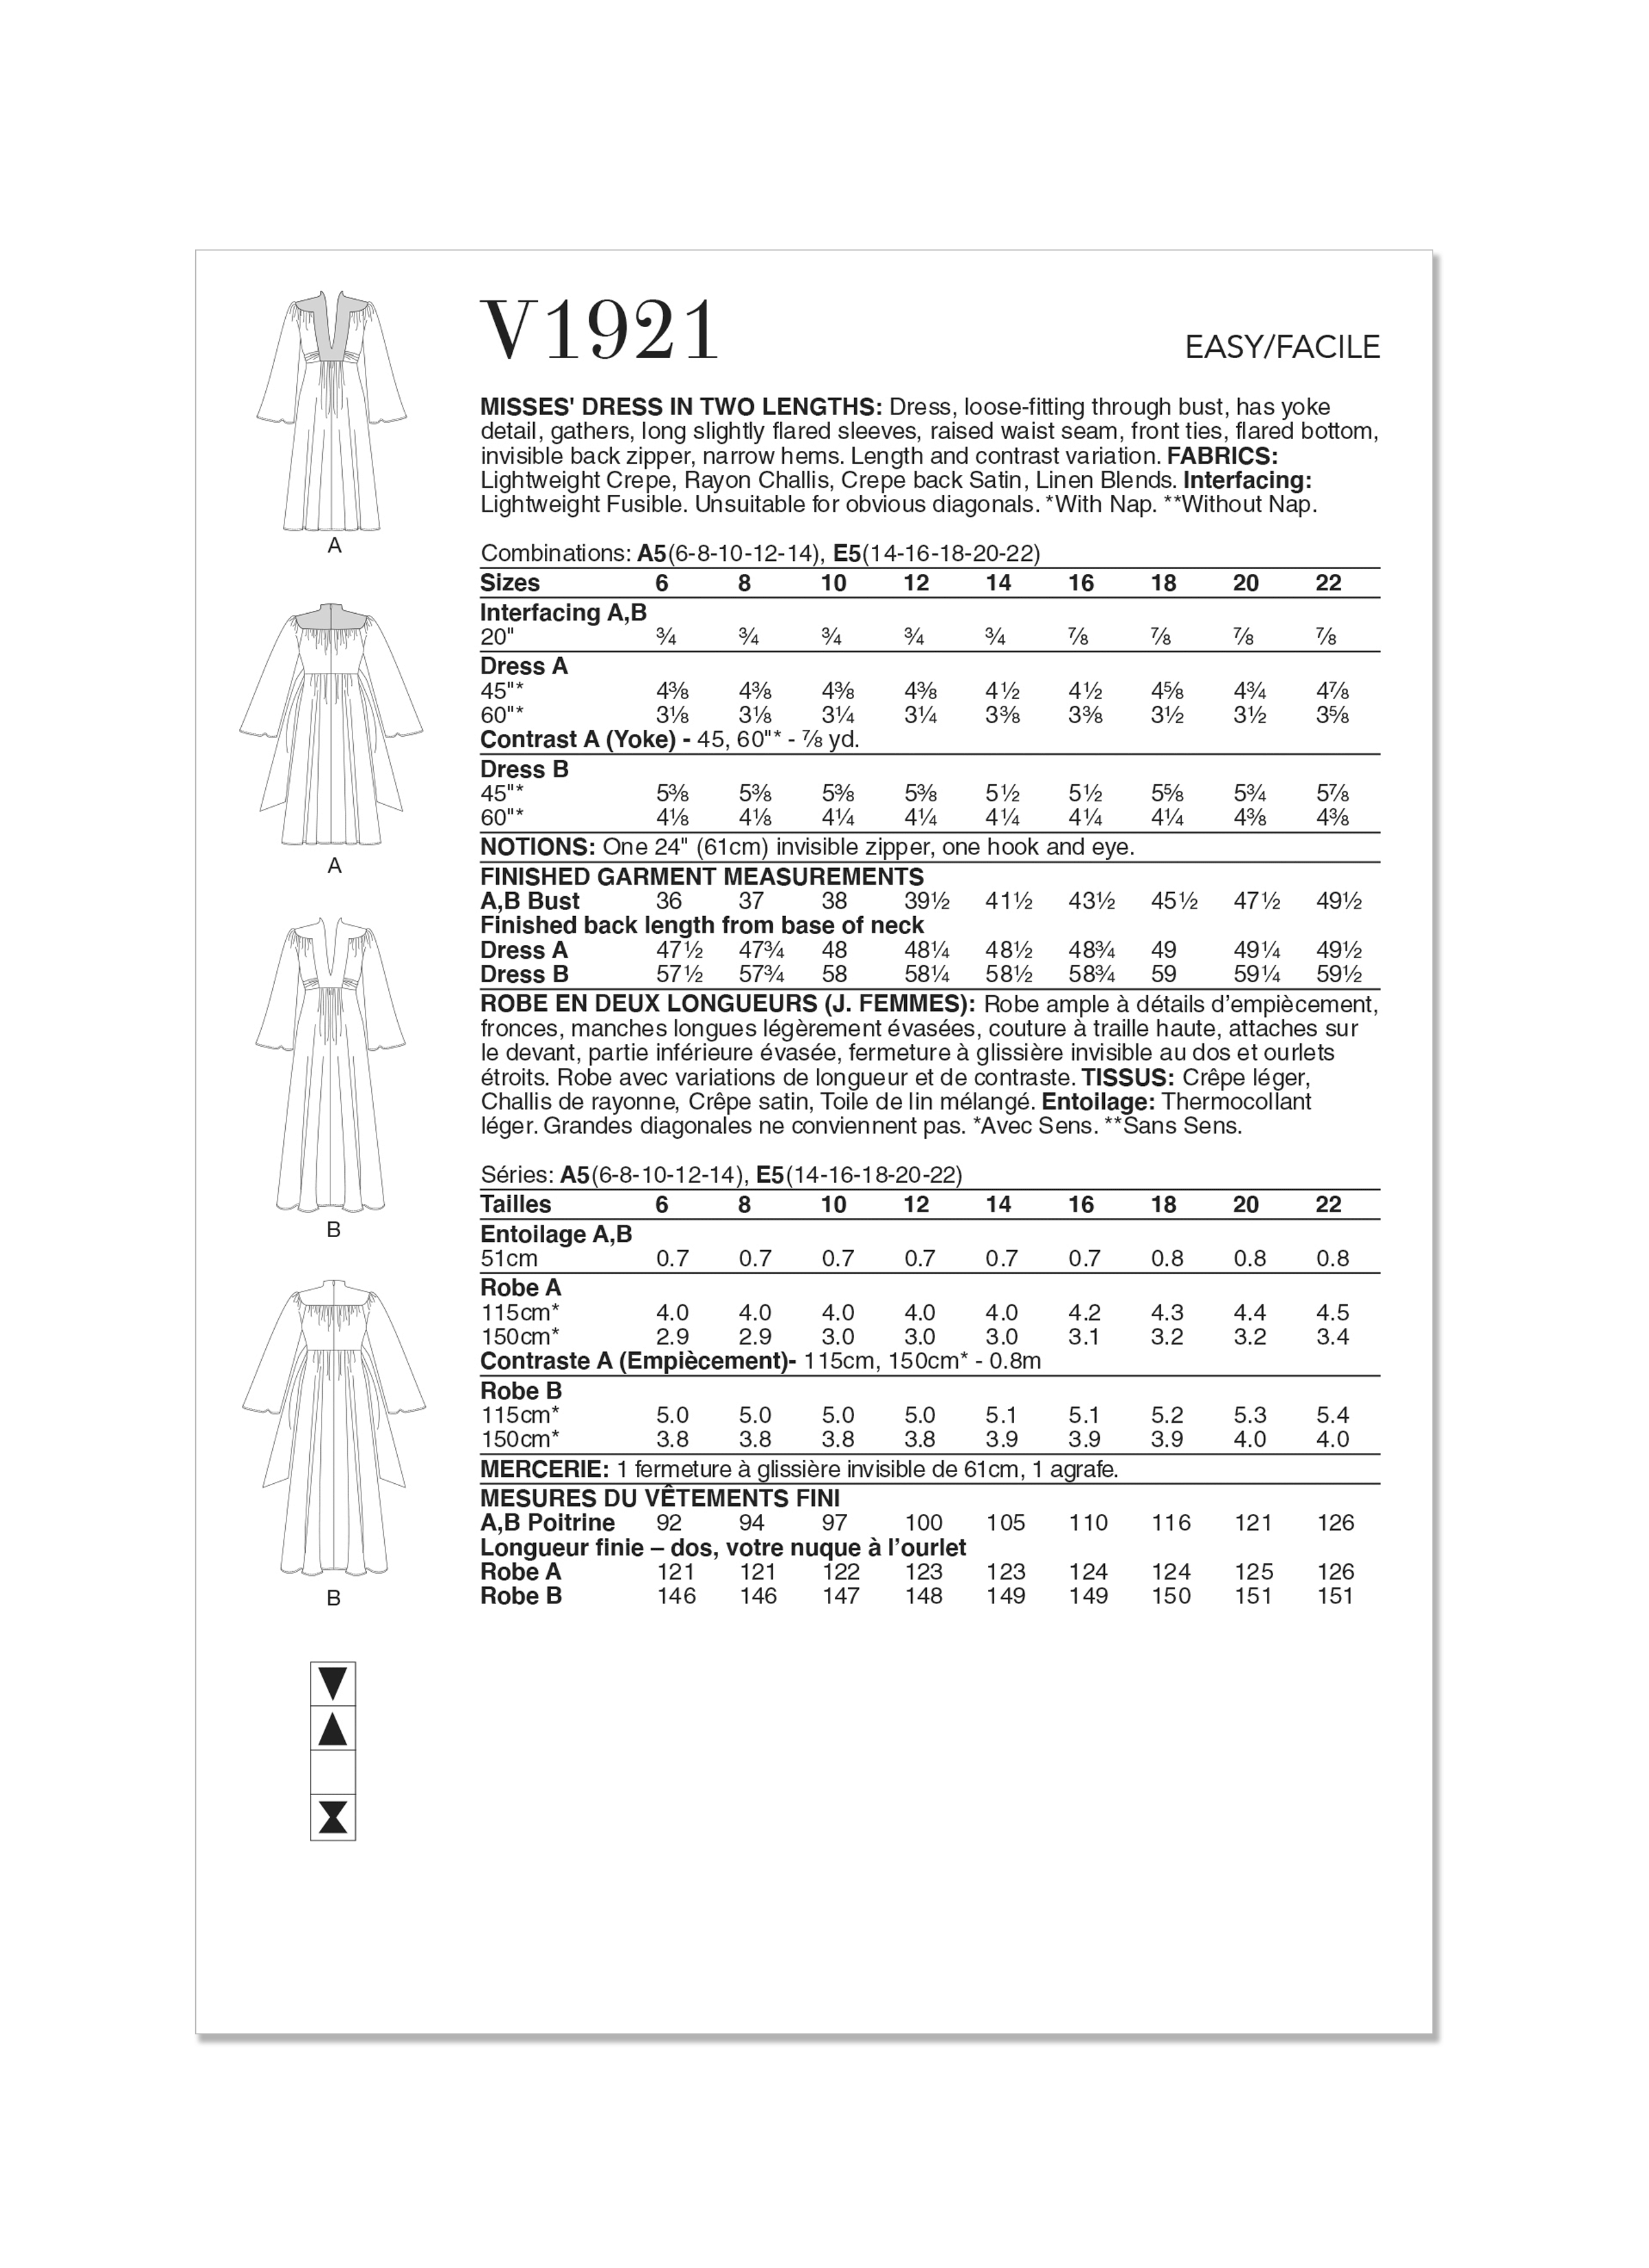 Vogue Sewing Pattern 1921 Dress in Two Lengths from Jaycotts Sewing Supplies